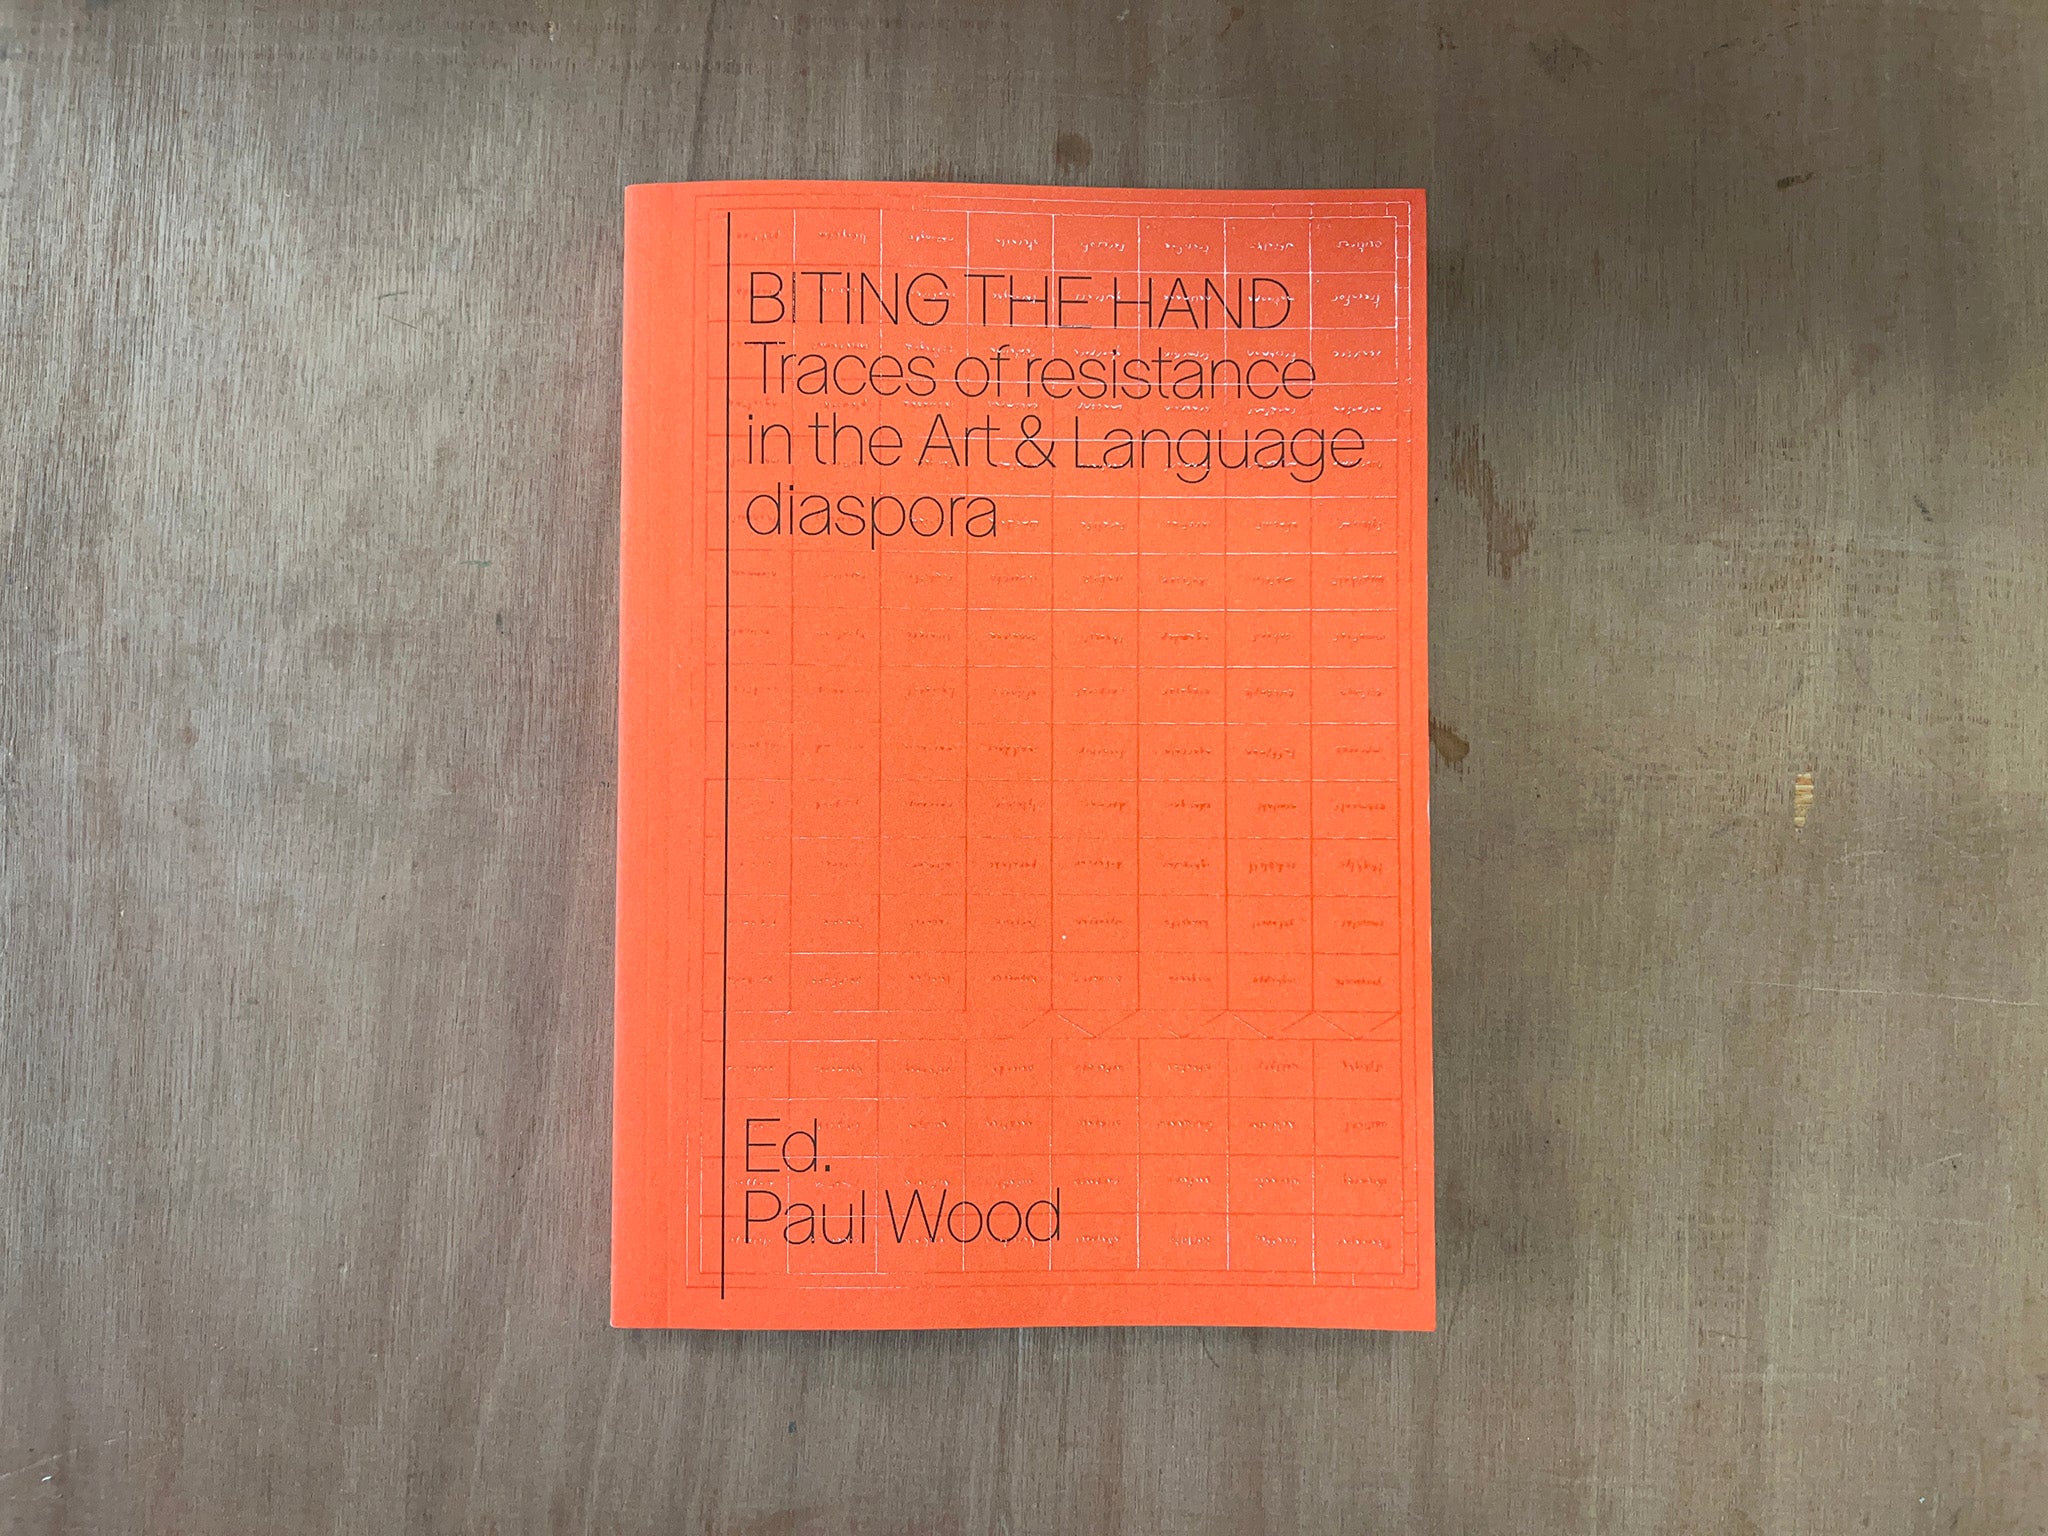 BITING THE HAND: TRACES OF RESISTANCE IN THE ART & LANGUAGE DIASPORA Ed. by Paul Wood